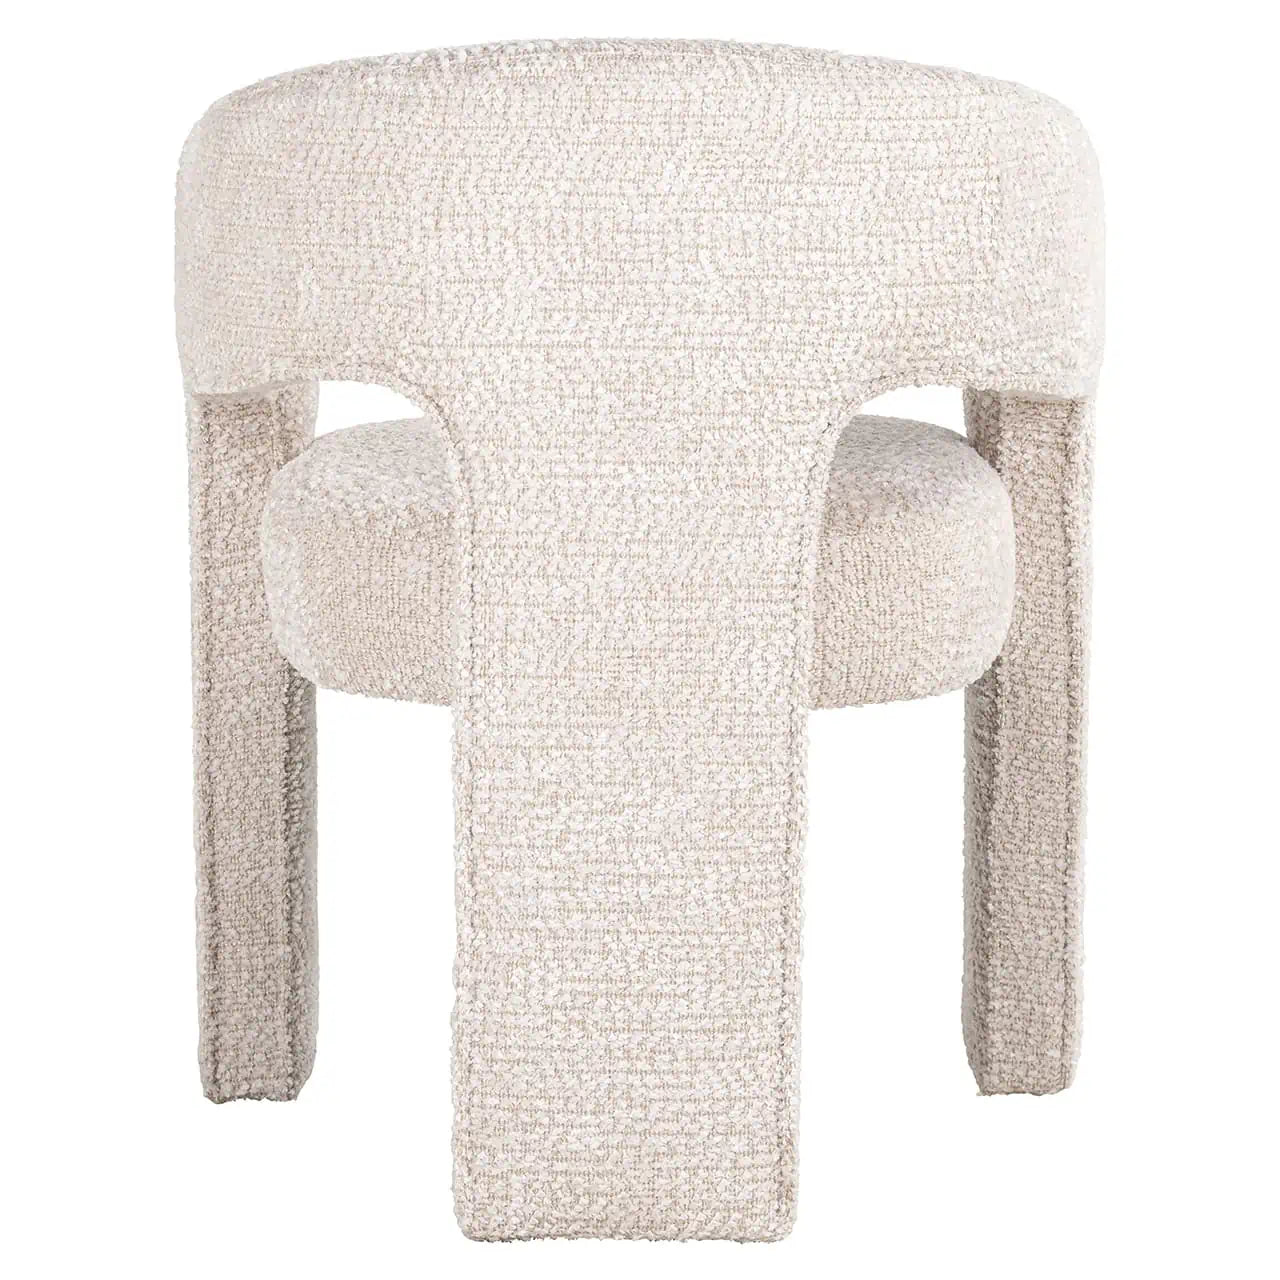 Richmond Interiors Belle Lovely Cream Boucle Fabric Dining Chair